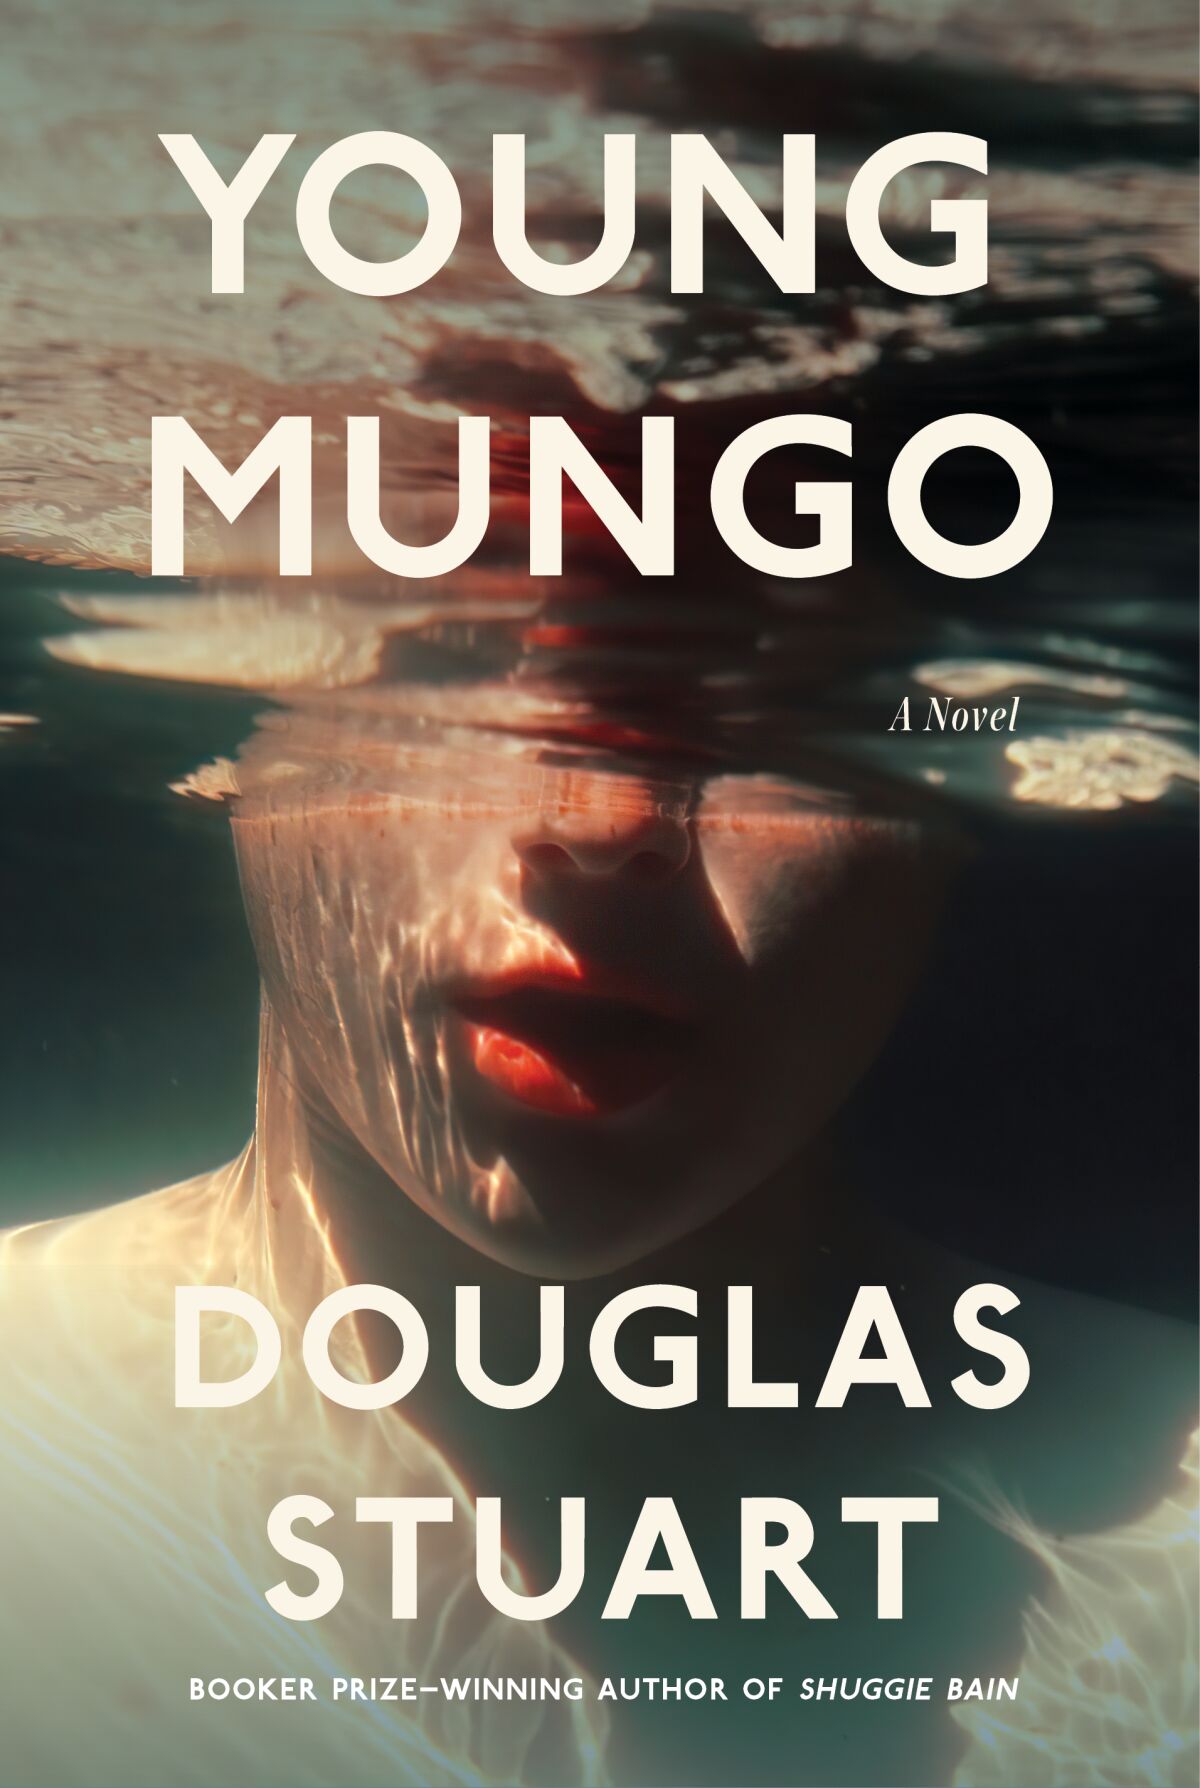 The book cover of "Young Mungo" by Douglas Stuart